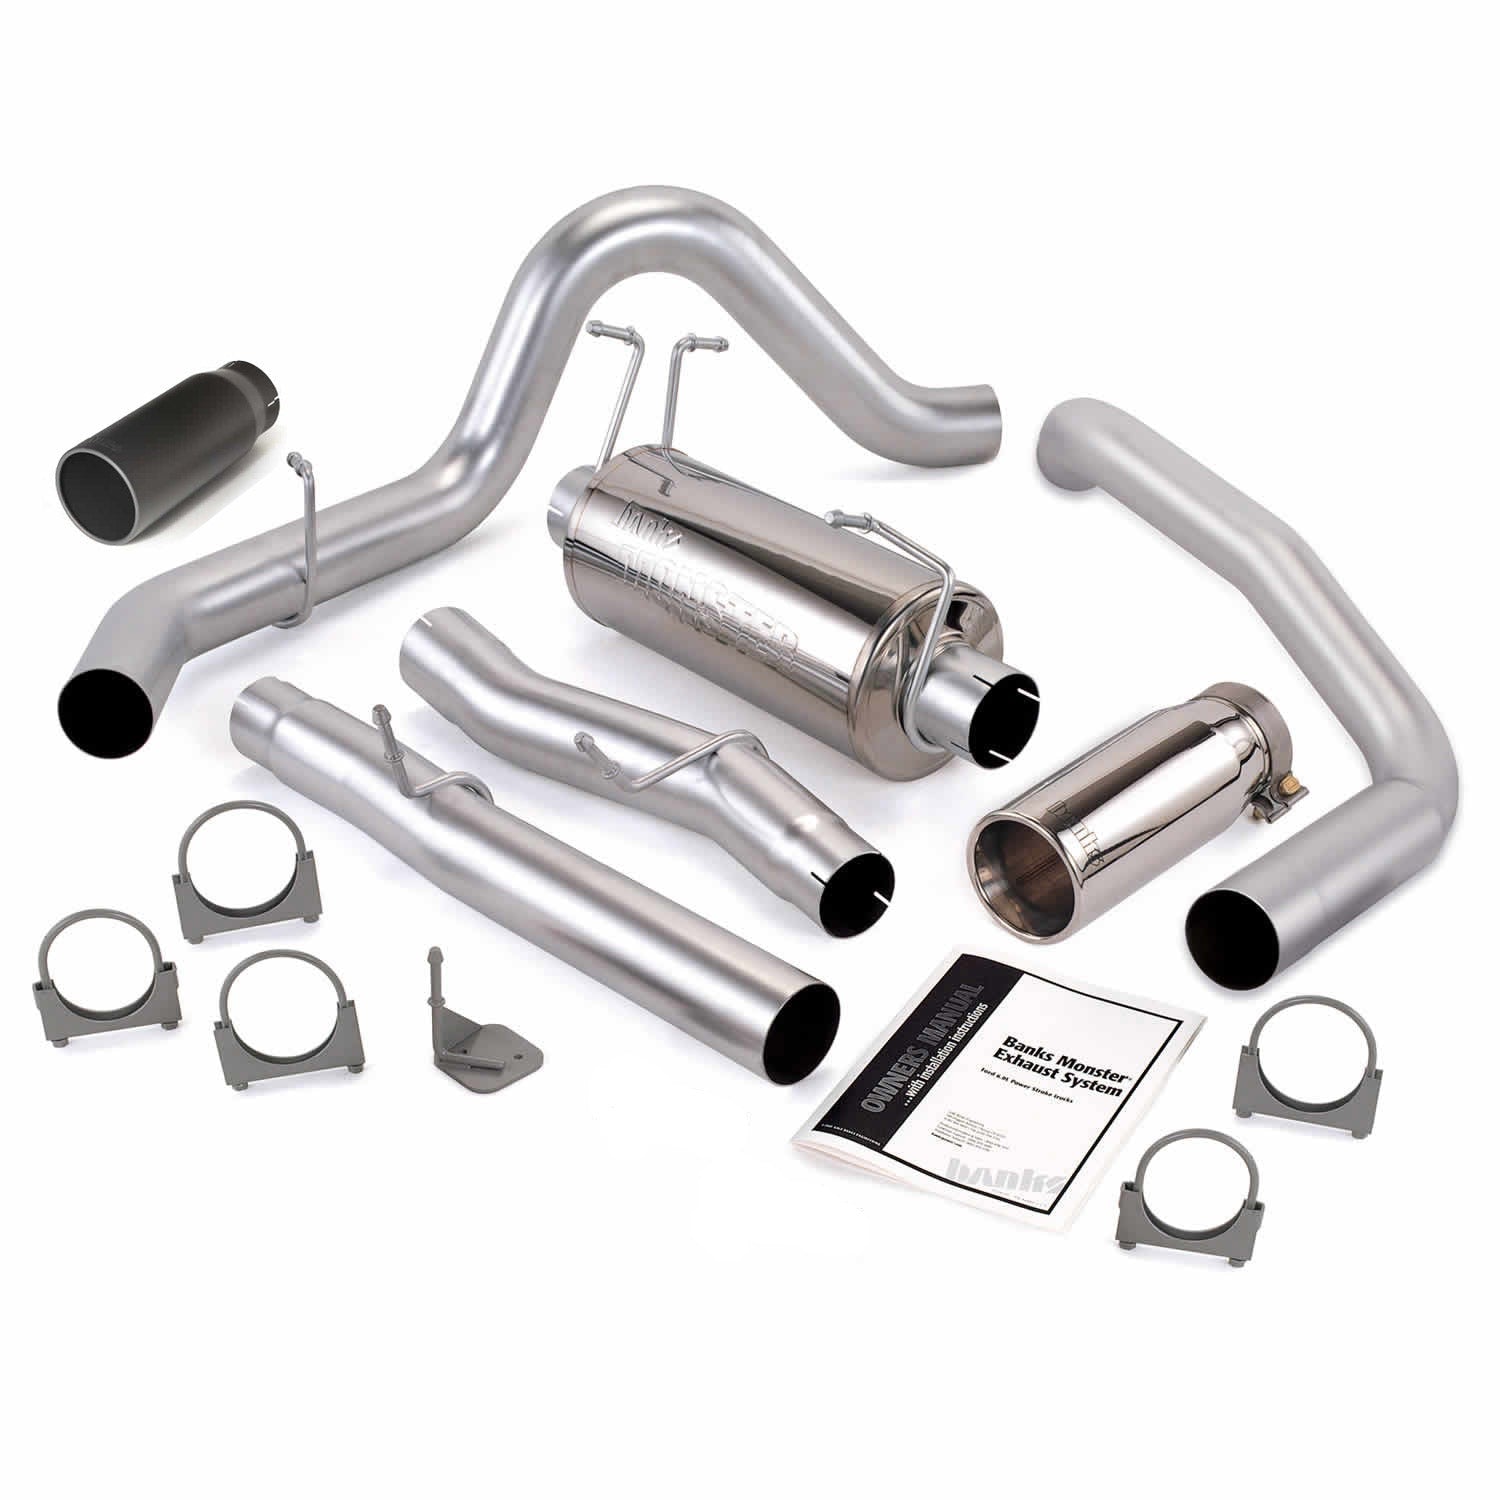 Monster Exhaust 48784-b and chrome